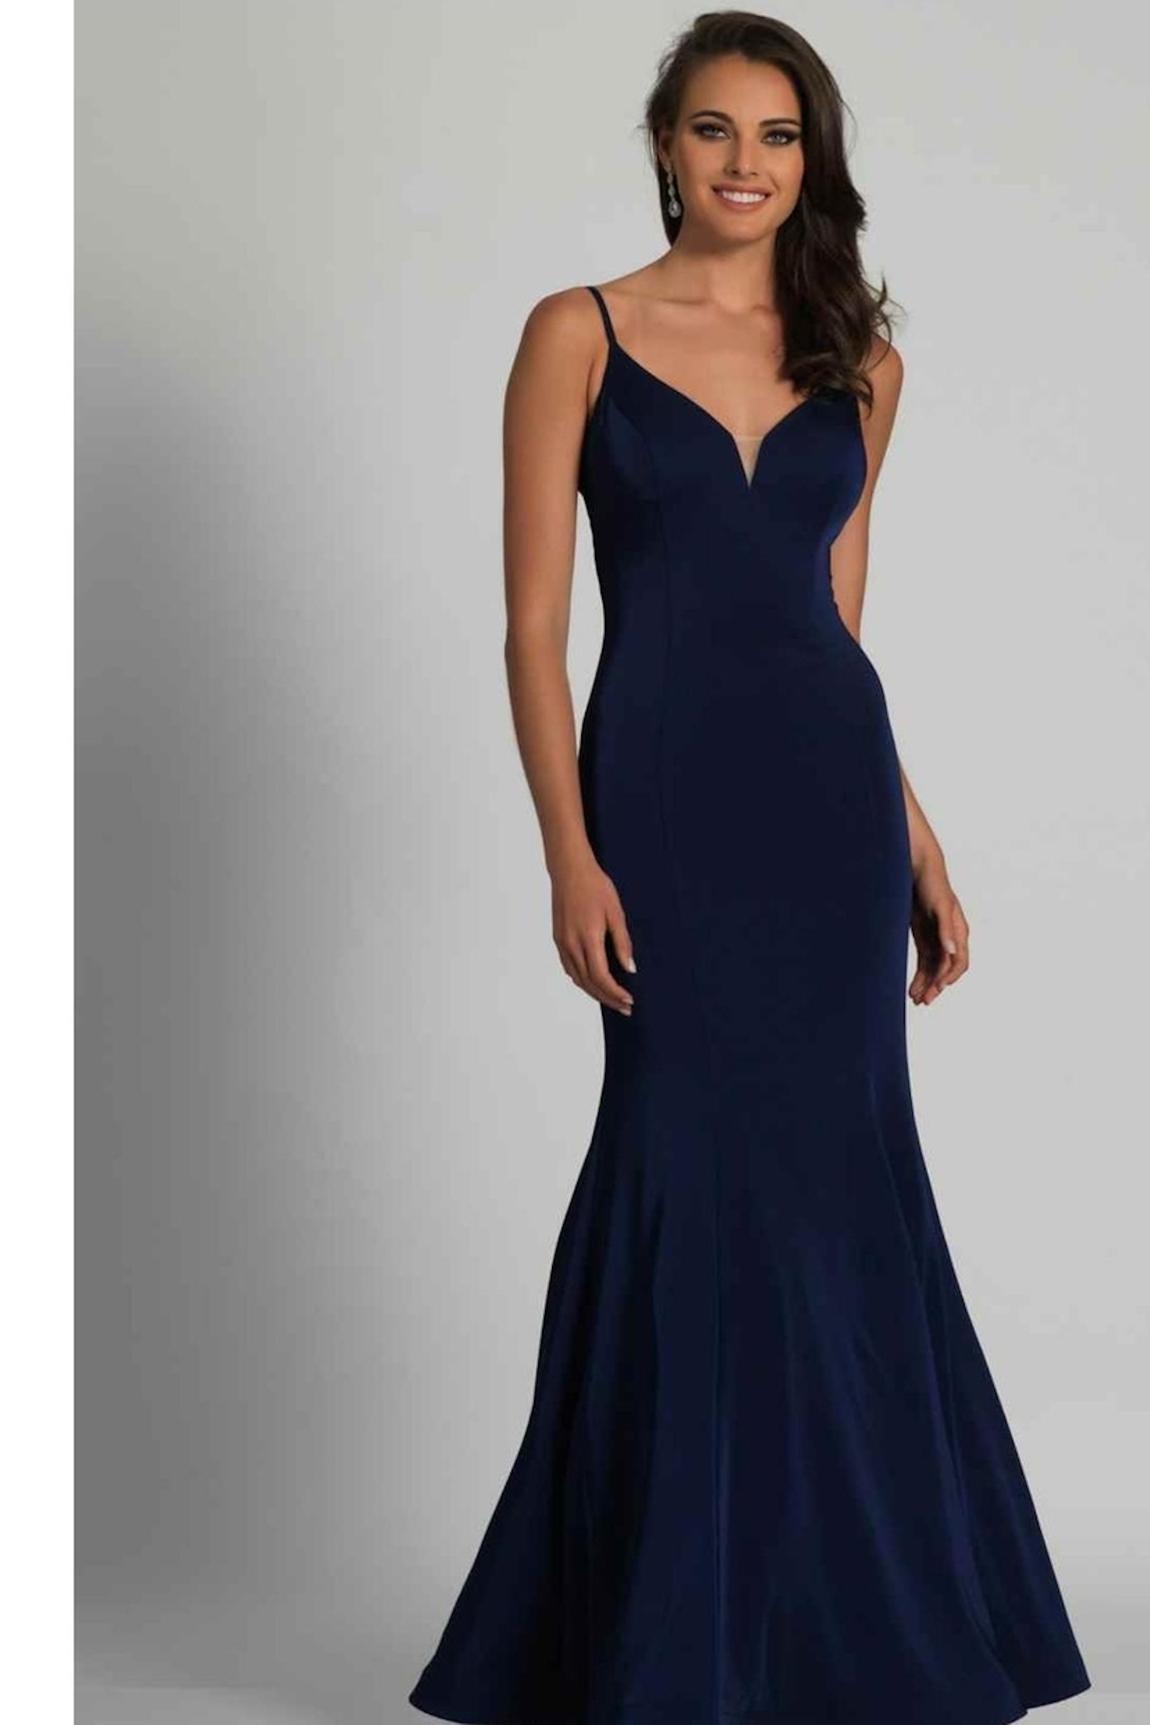 Style CLASSIC NAVY GOWN Dave and Johnny Size 12 Navy Blue Mermaid Dress on Queenly